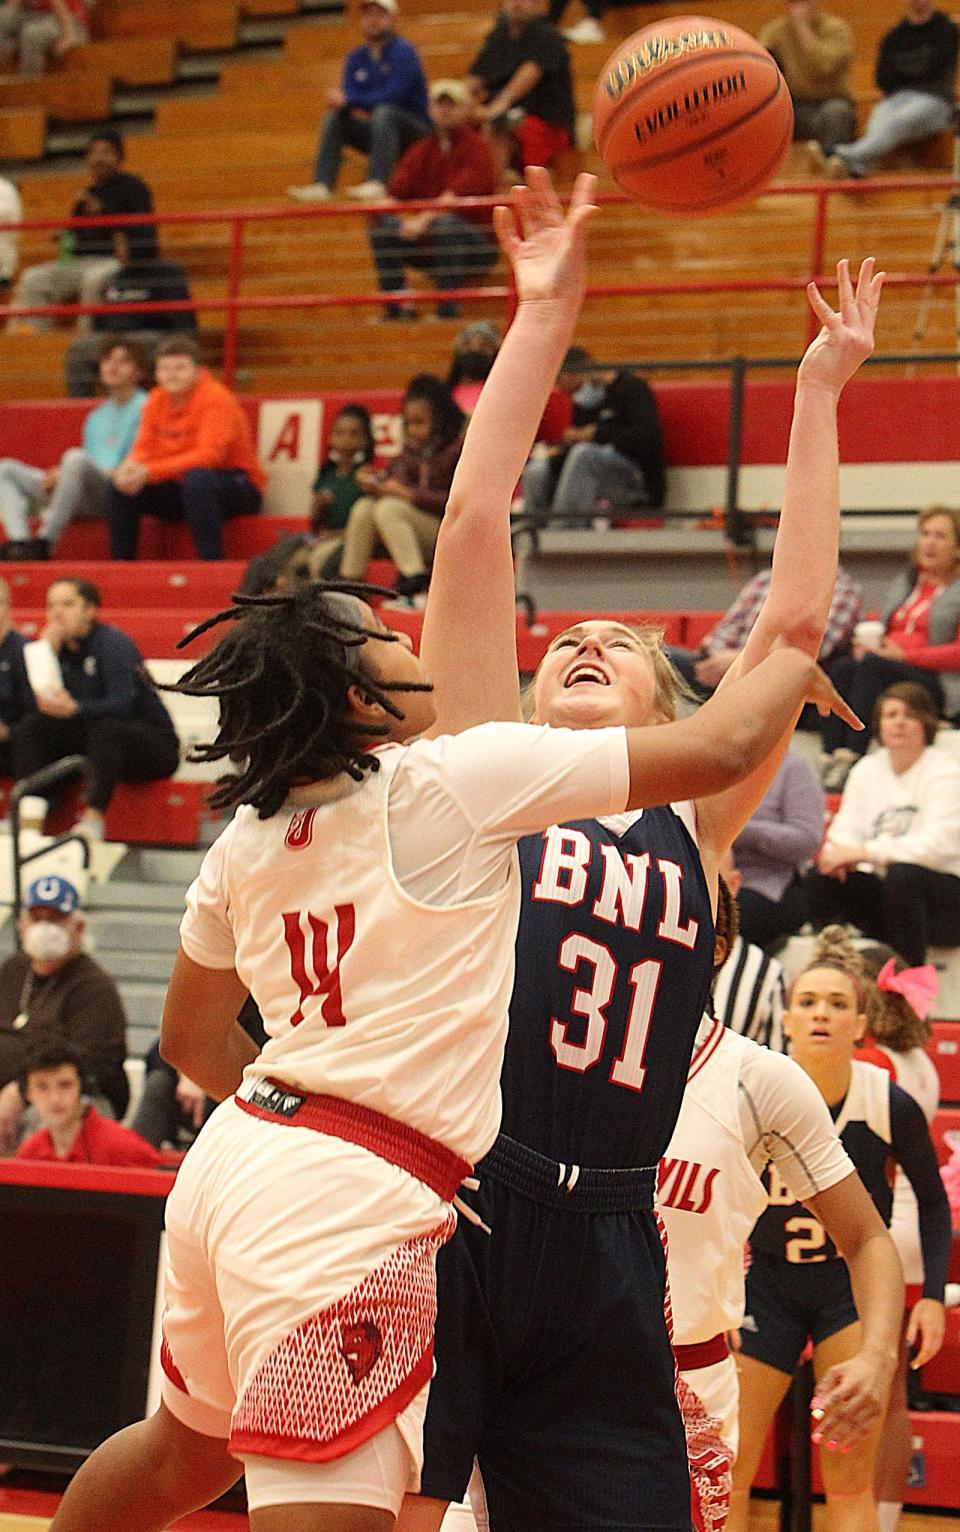 Bedford North Lawrence's Ella Turner (31) is fouled on the shot by a Jeffersonville defender during sectional action.